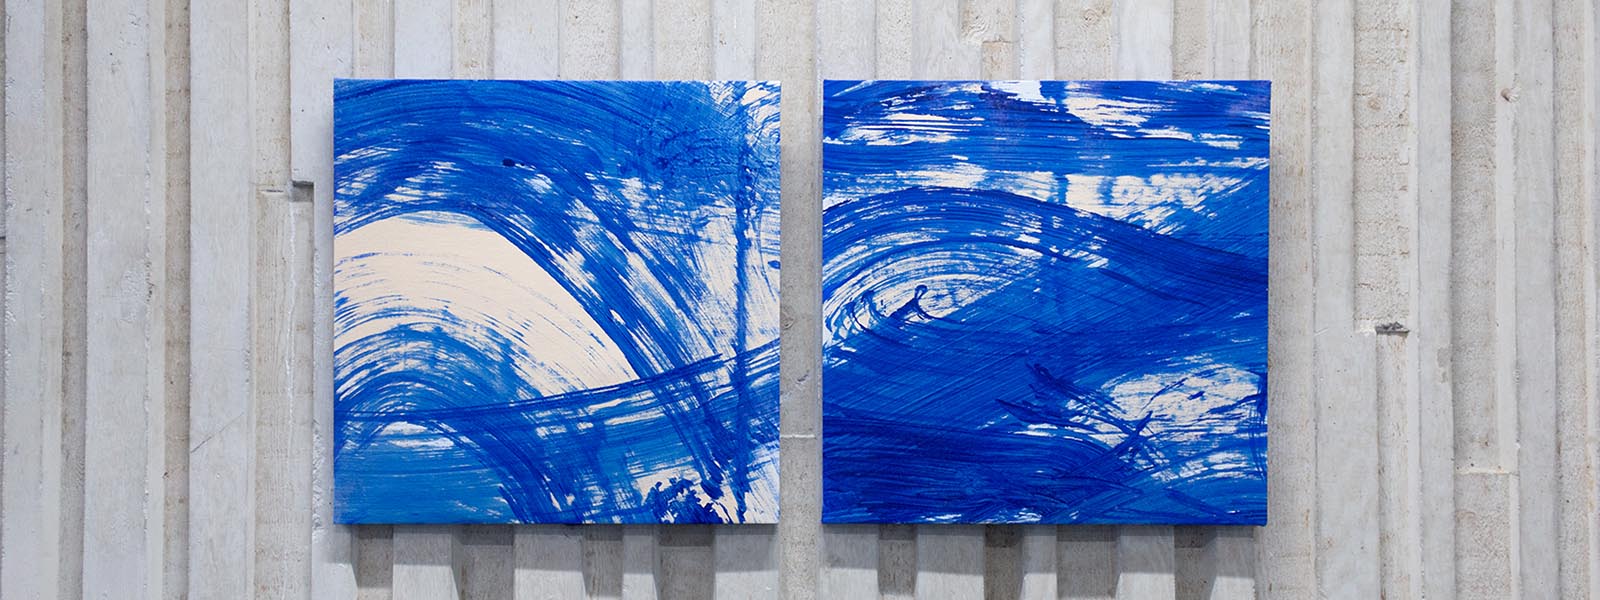 Two canvases from the Traces exhibition